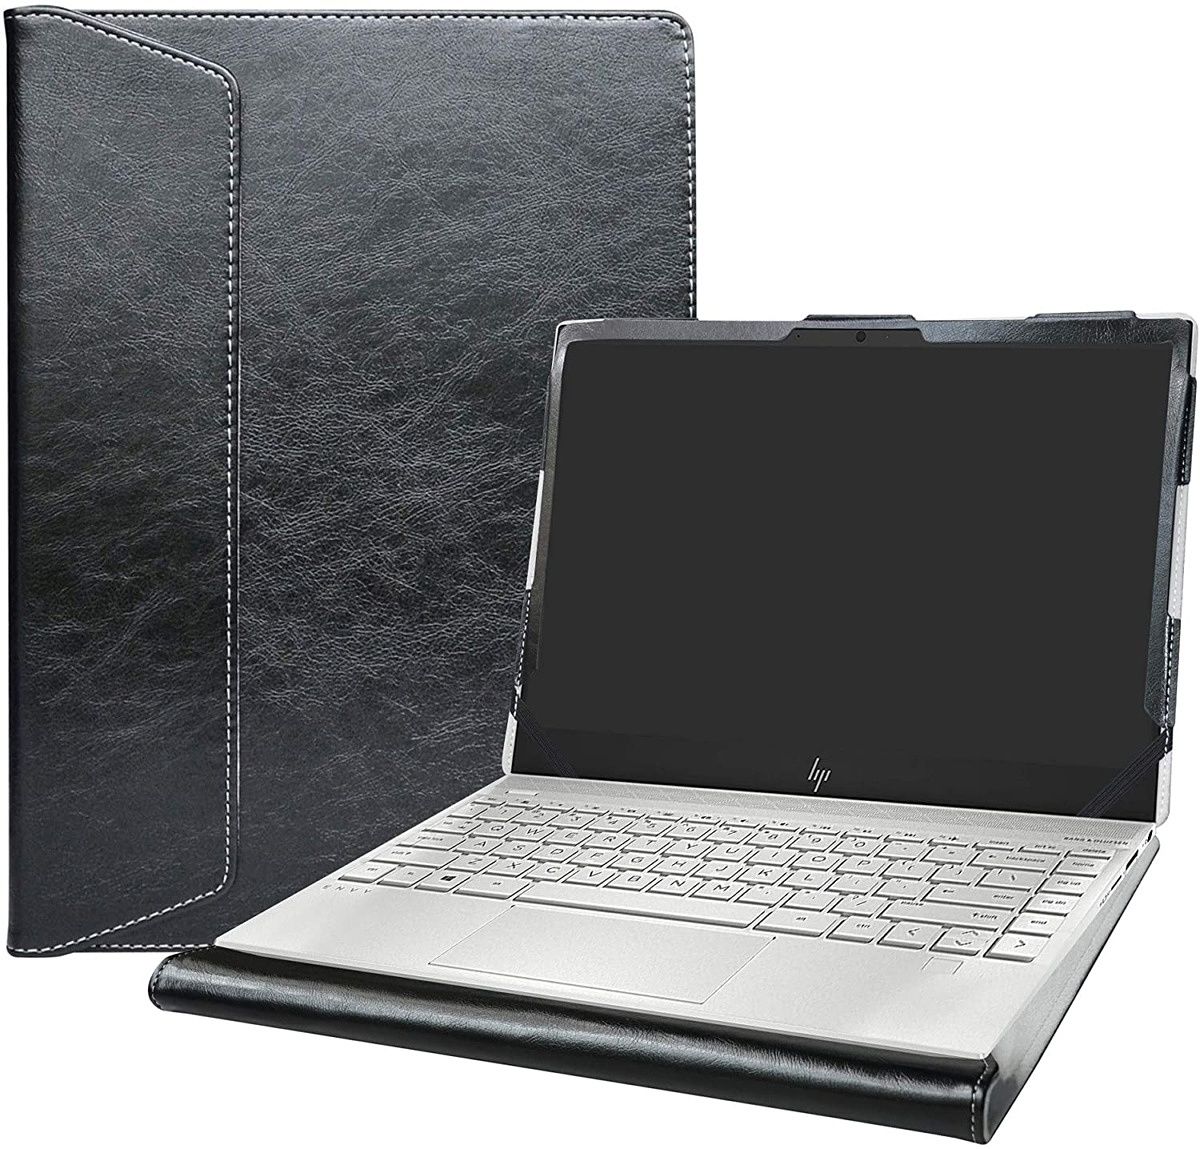 This is a folio-style faux leather cover for the Pavilion Aero 13 that can strap onto the laptop to provide protection against potential damage, while at the same time offering a neat professional look.